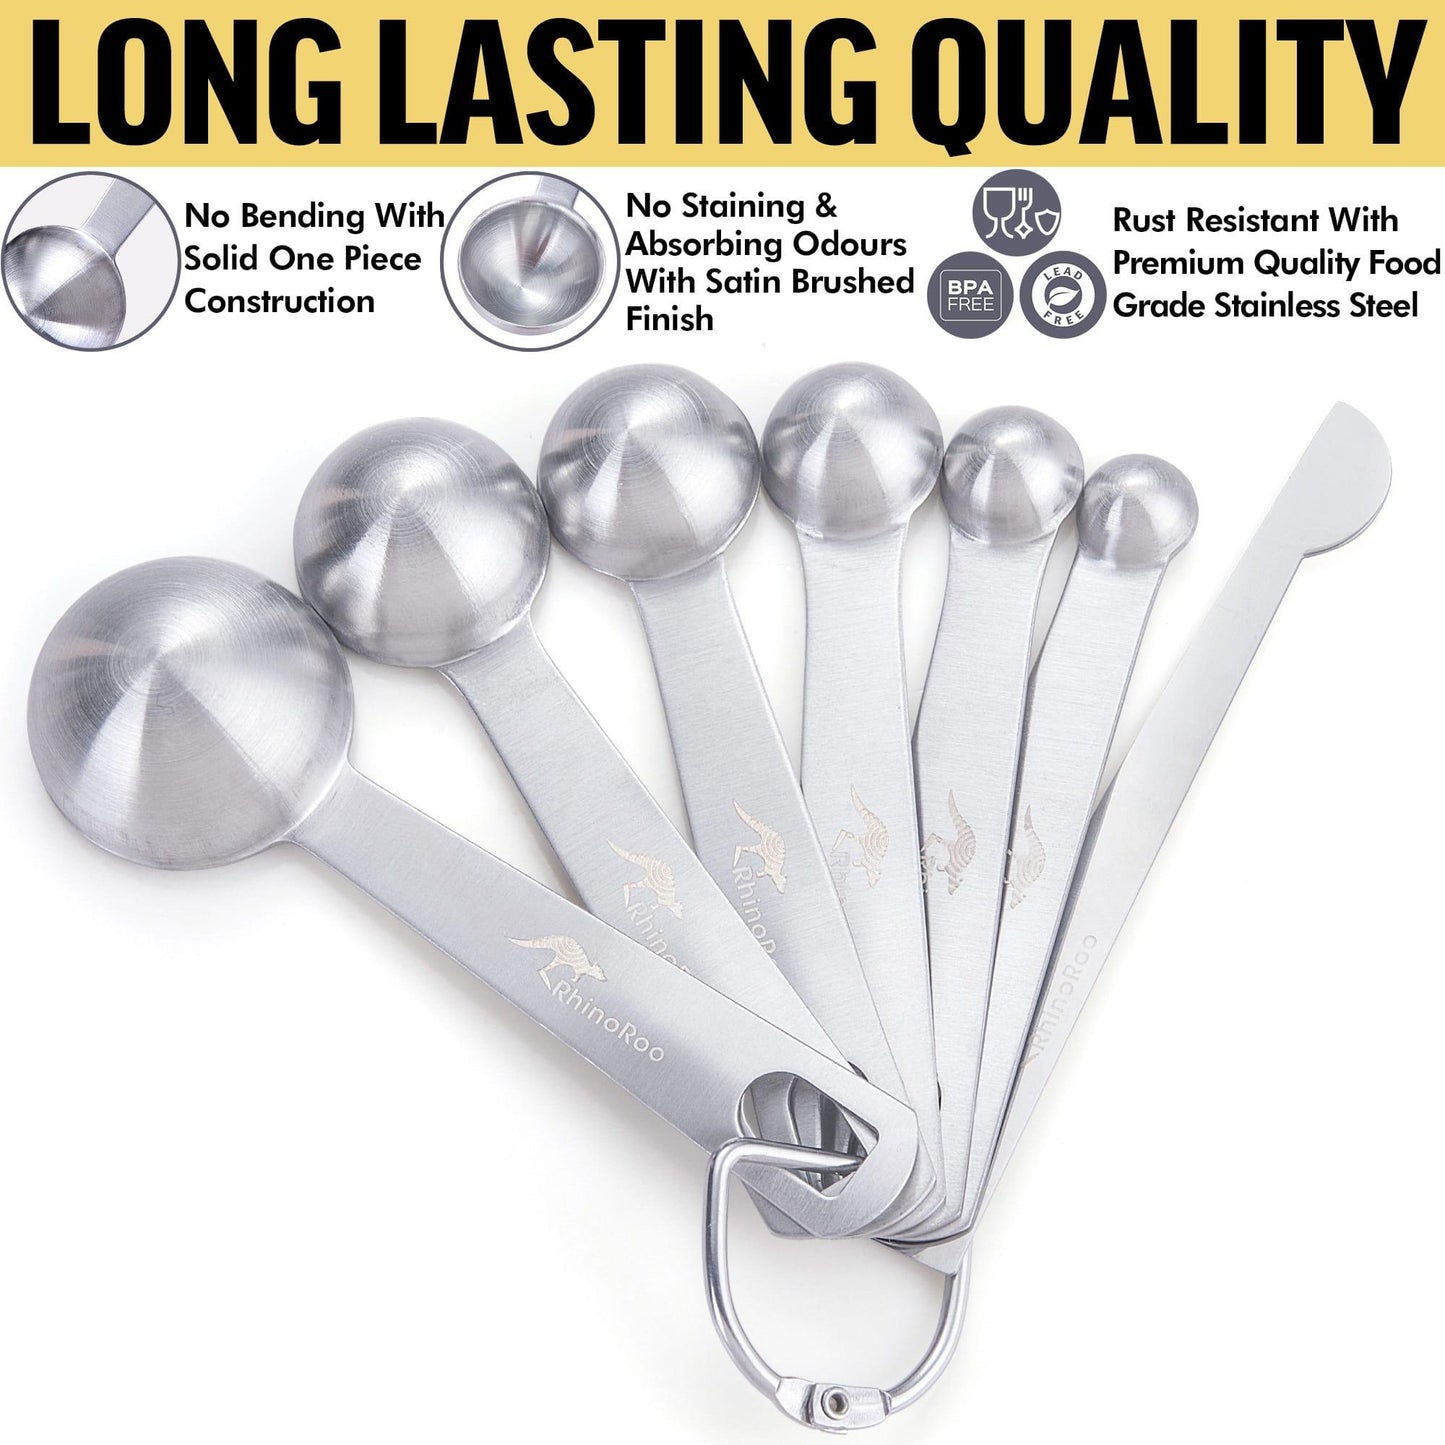 Standard 15ml Tablespoon to 1/8 Teaspoon Stainless Steel Measuring Spoons Set with Leveller - RhinoRoo